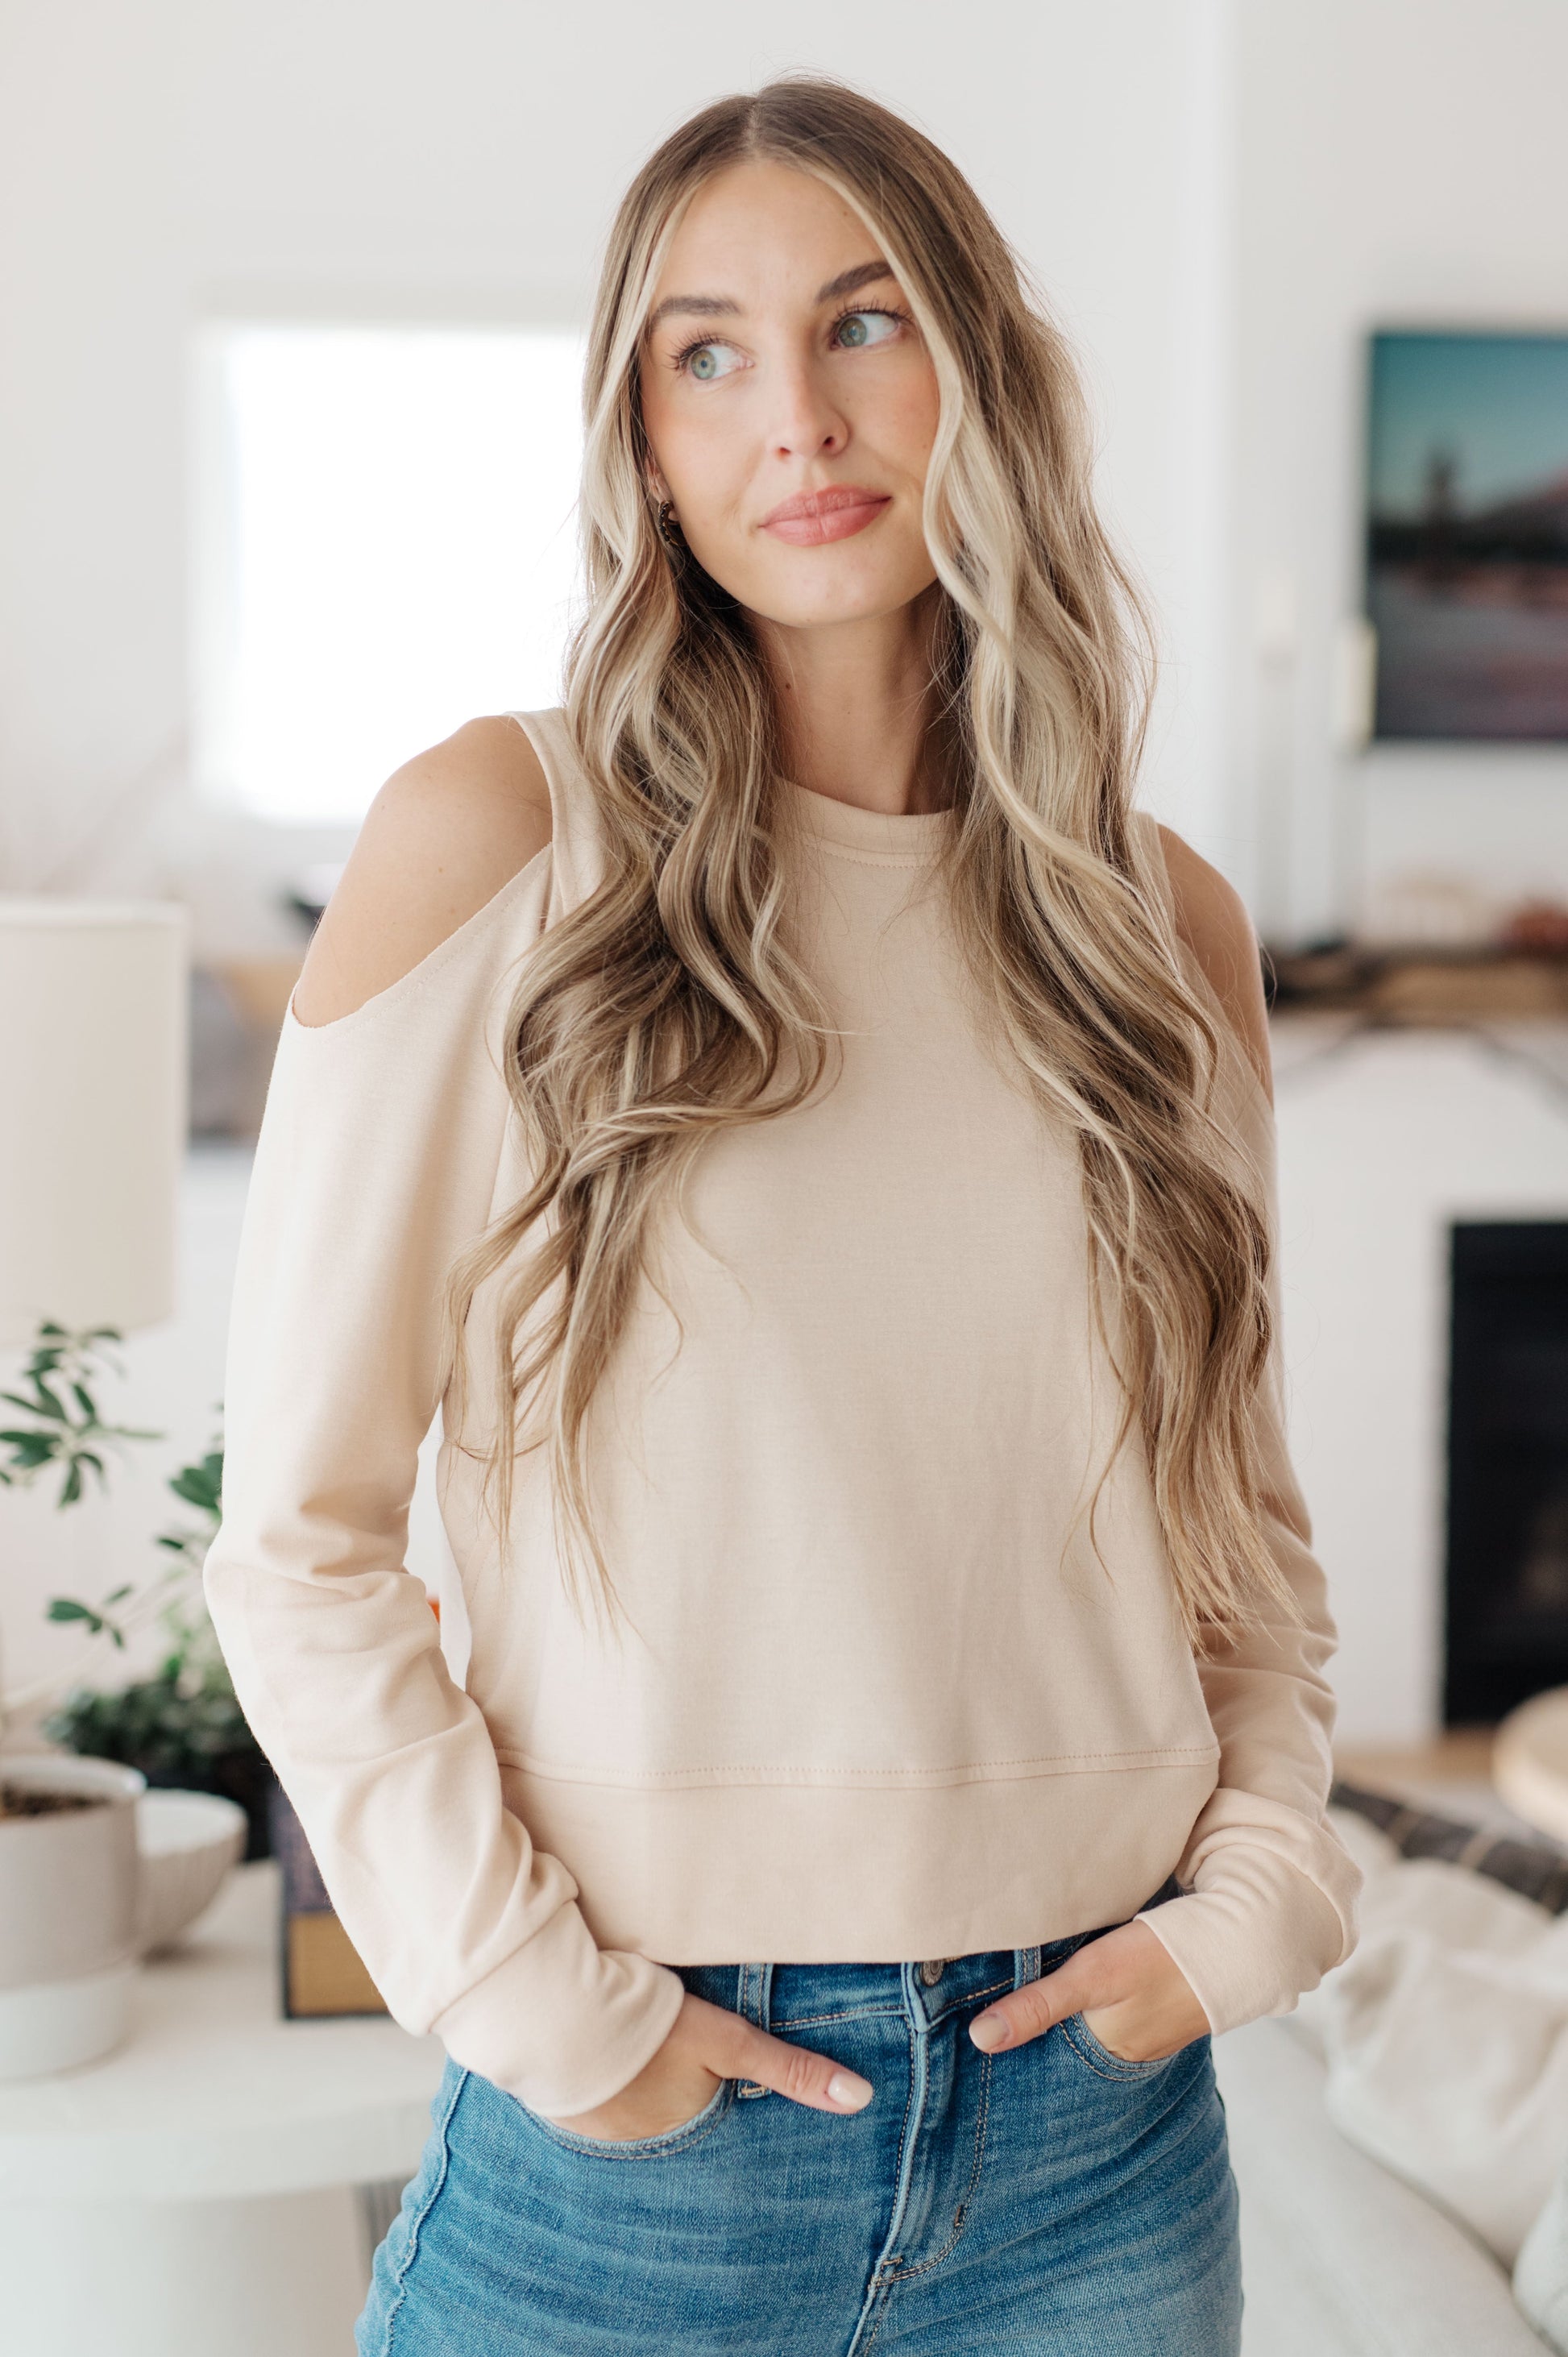 Look no further than this Carefully Crafted Cold Shoulder Blouse for a stylish and comfortable dressy look. Made of lightweight French Terry fabric, it features a round neckline and shoulder cut-outs for a timelessly stylish look. Perfect for any occasion.S - 3X